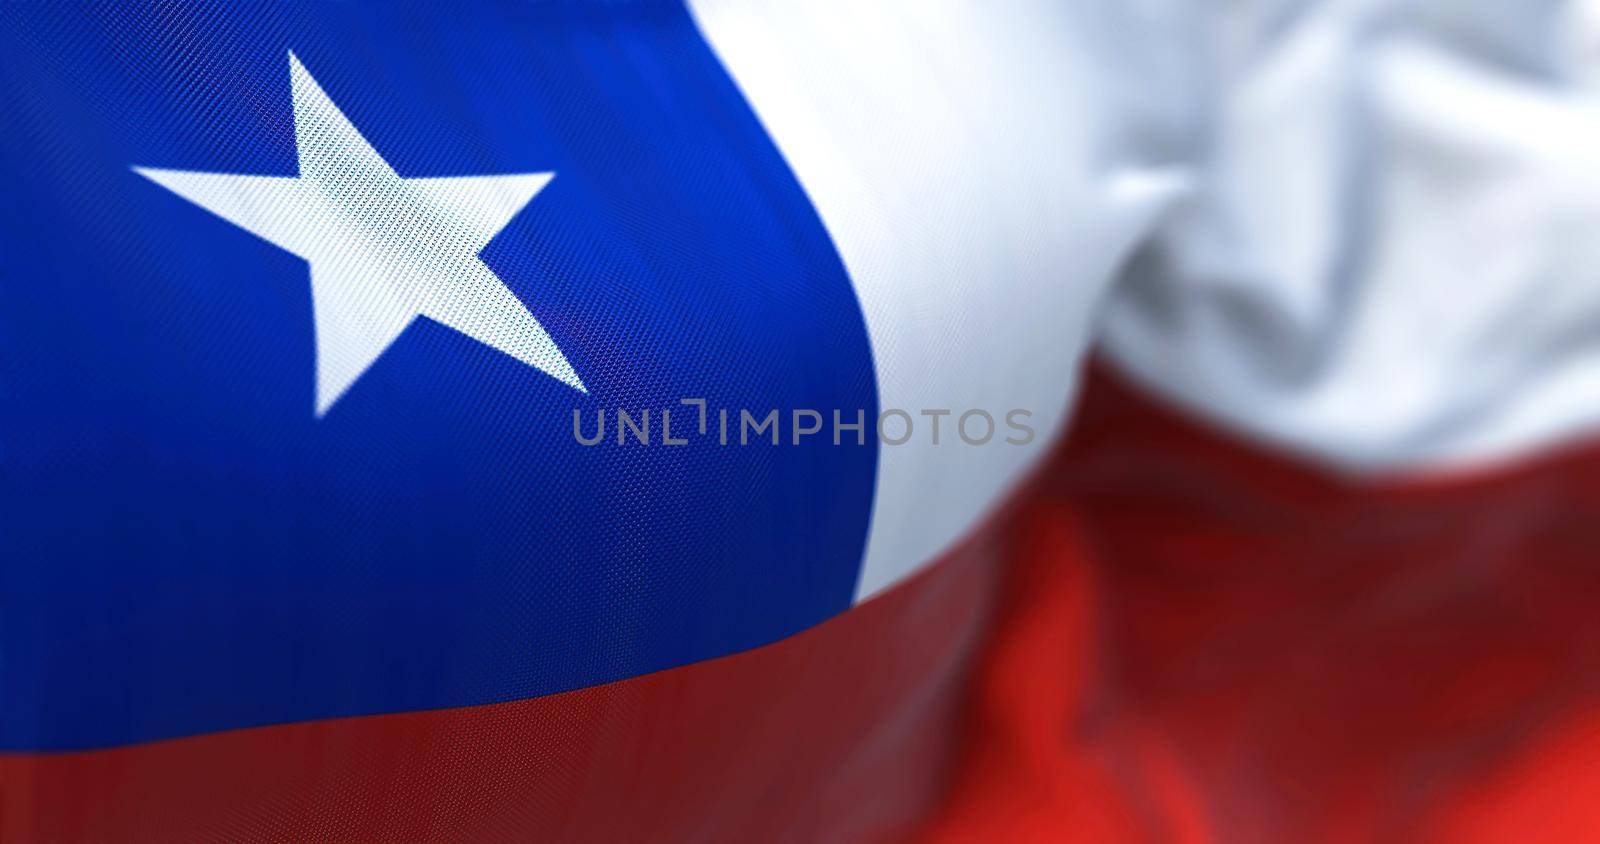 Close-up view of the Chile national flag waving in the wind. The Republic of Chile is a country in the western part of South America. Fabric textured background. Selective focus